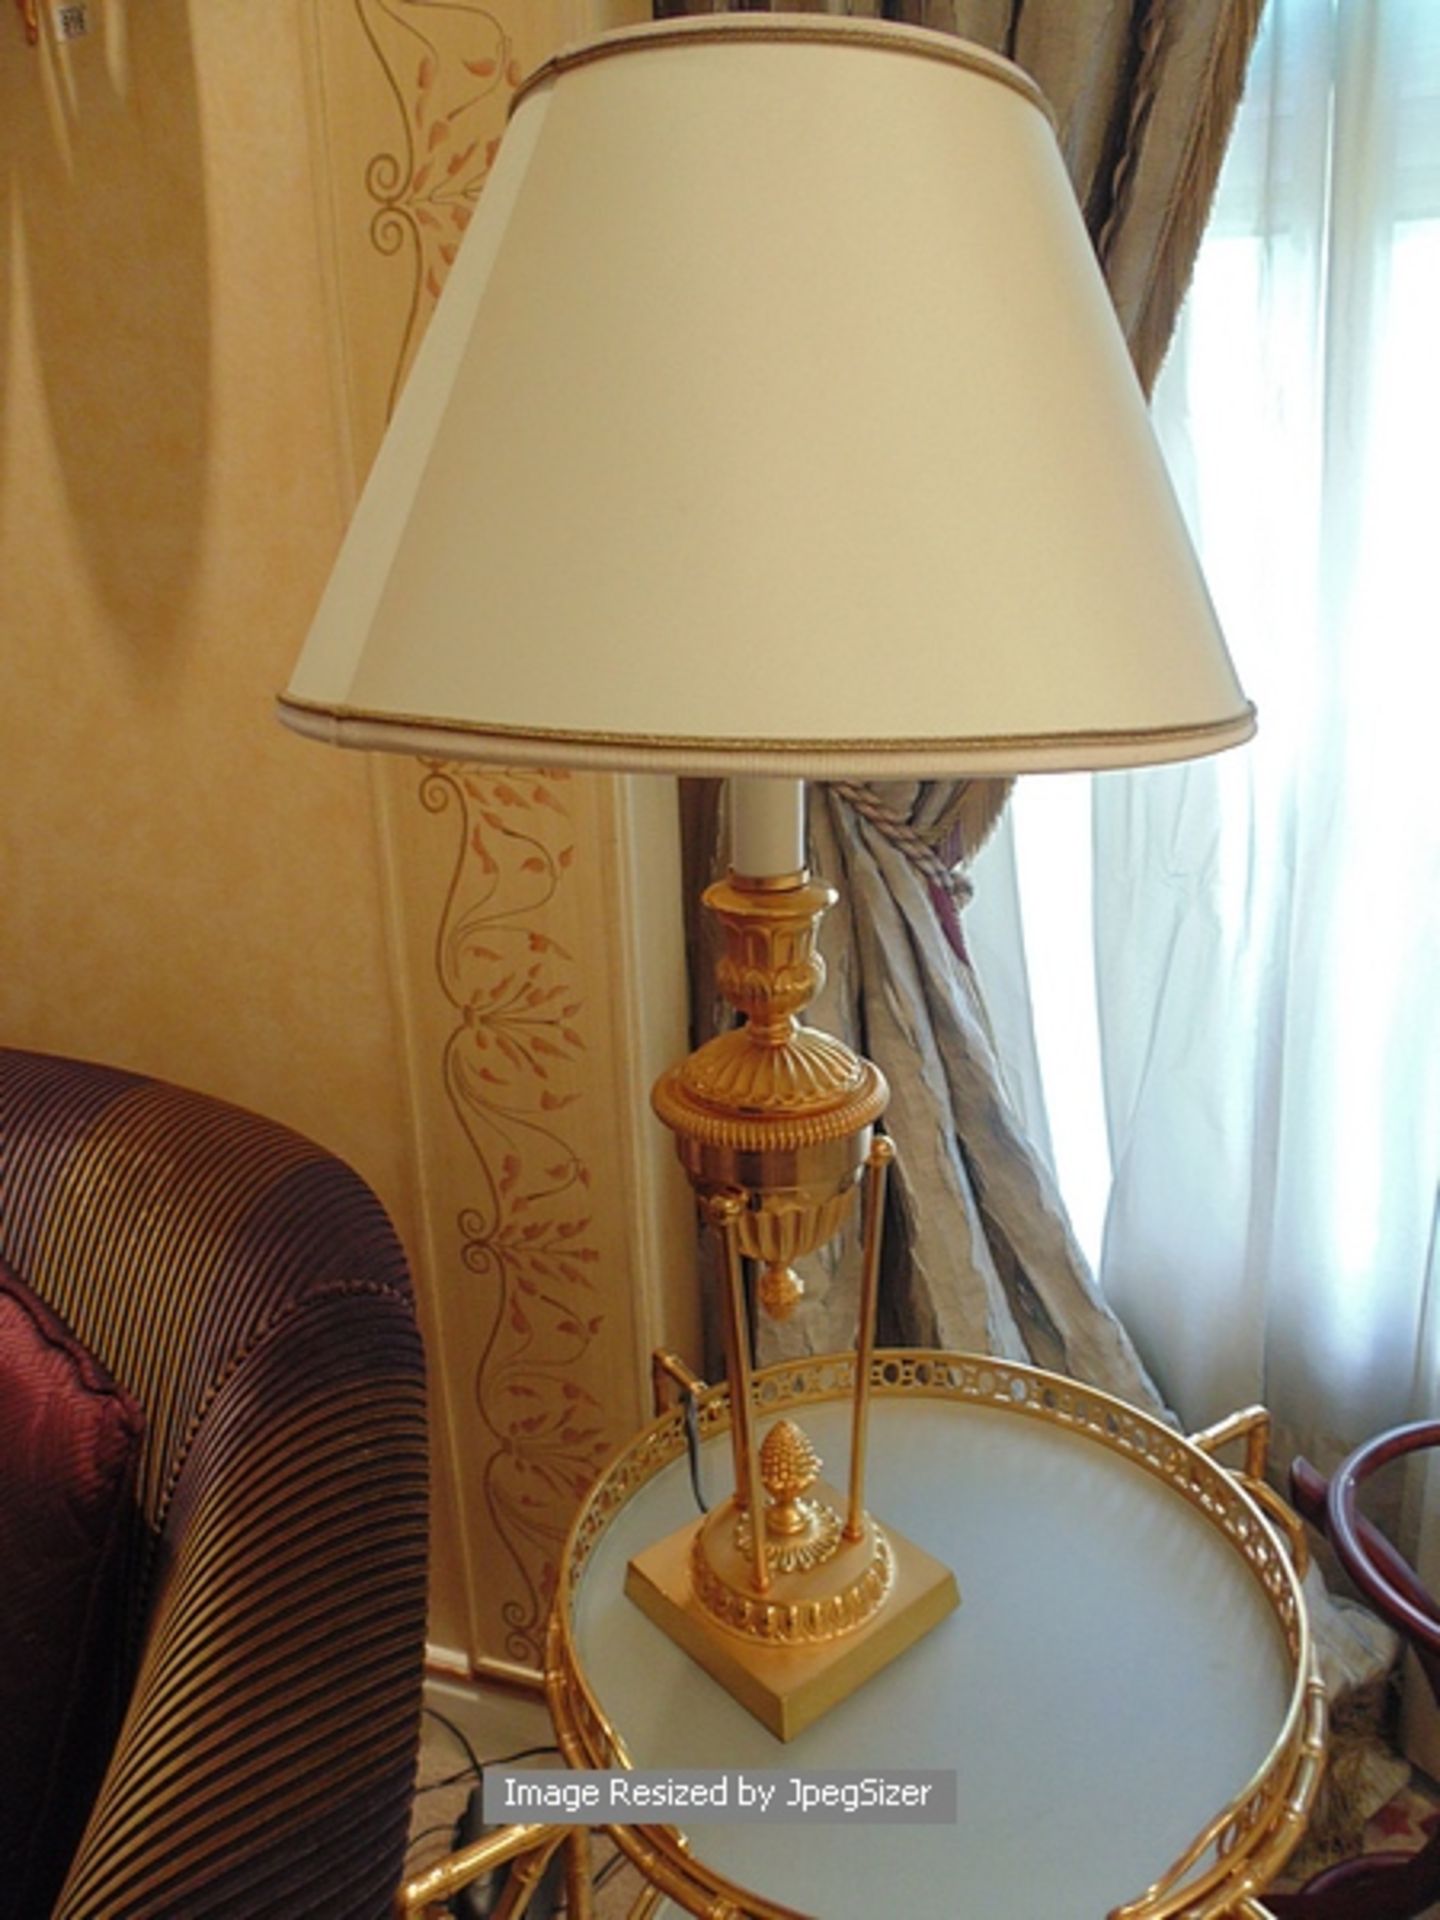 Laudarte Cerere table lamps, bronze castings marble column 24ct. gold finish 710mm tall